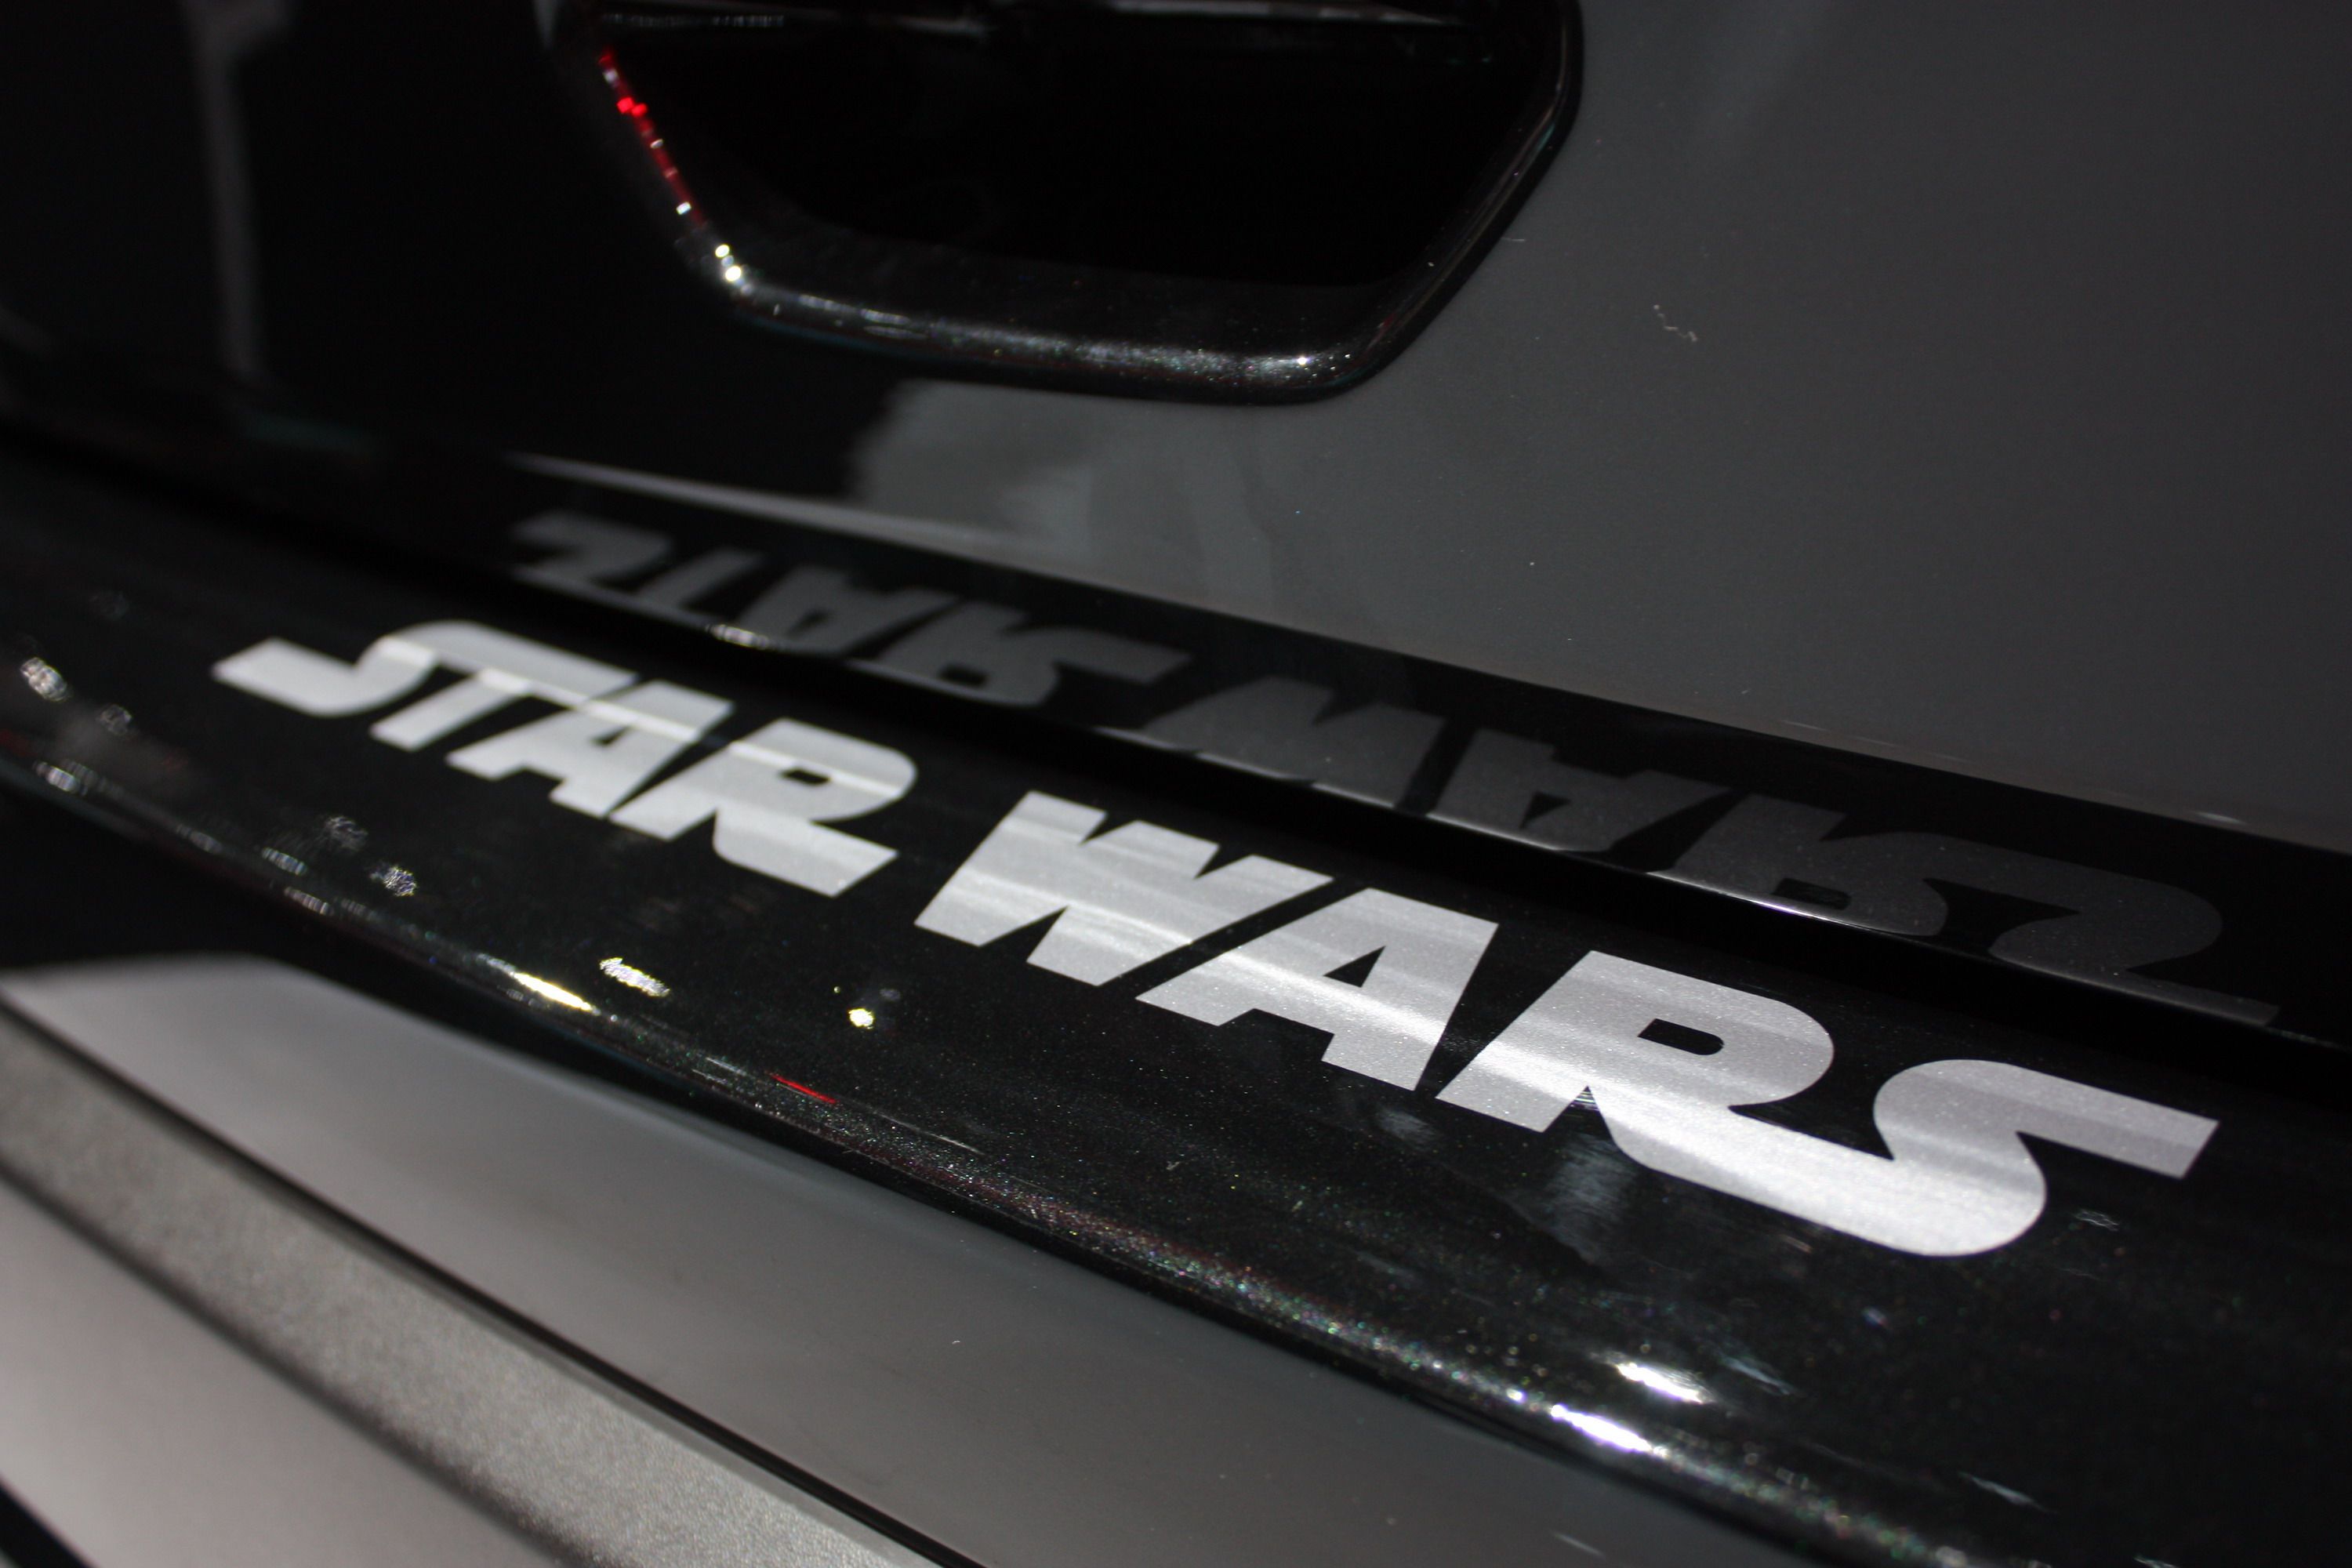 2017 Nissan Rogue One Star Wars Limited Edition